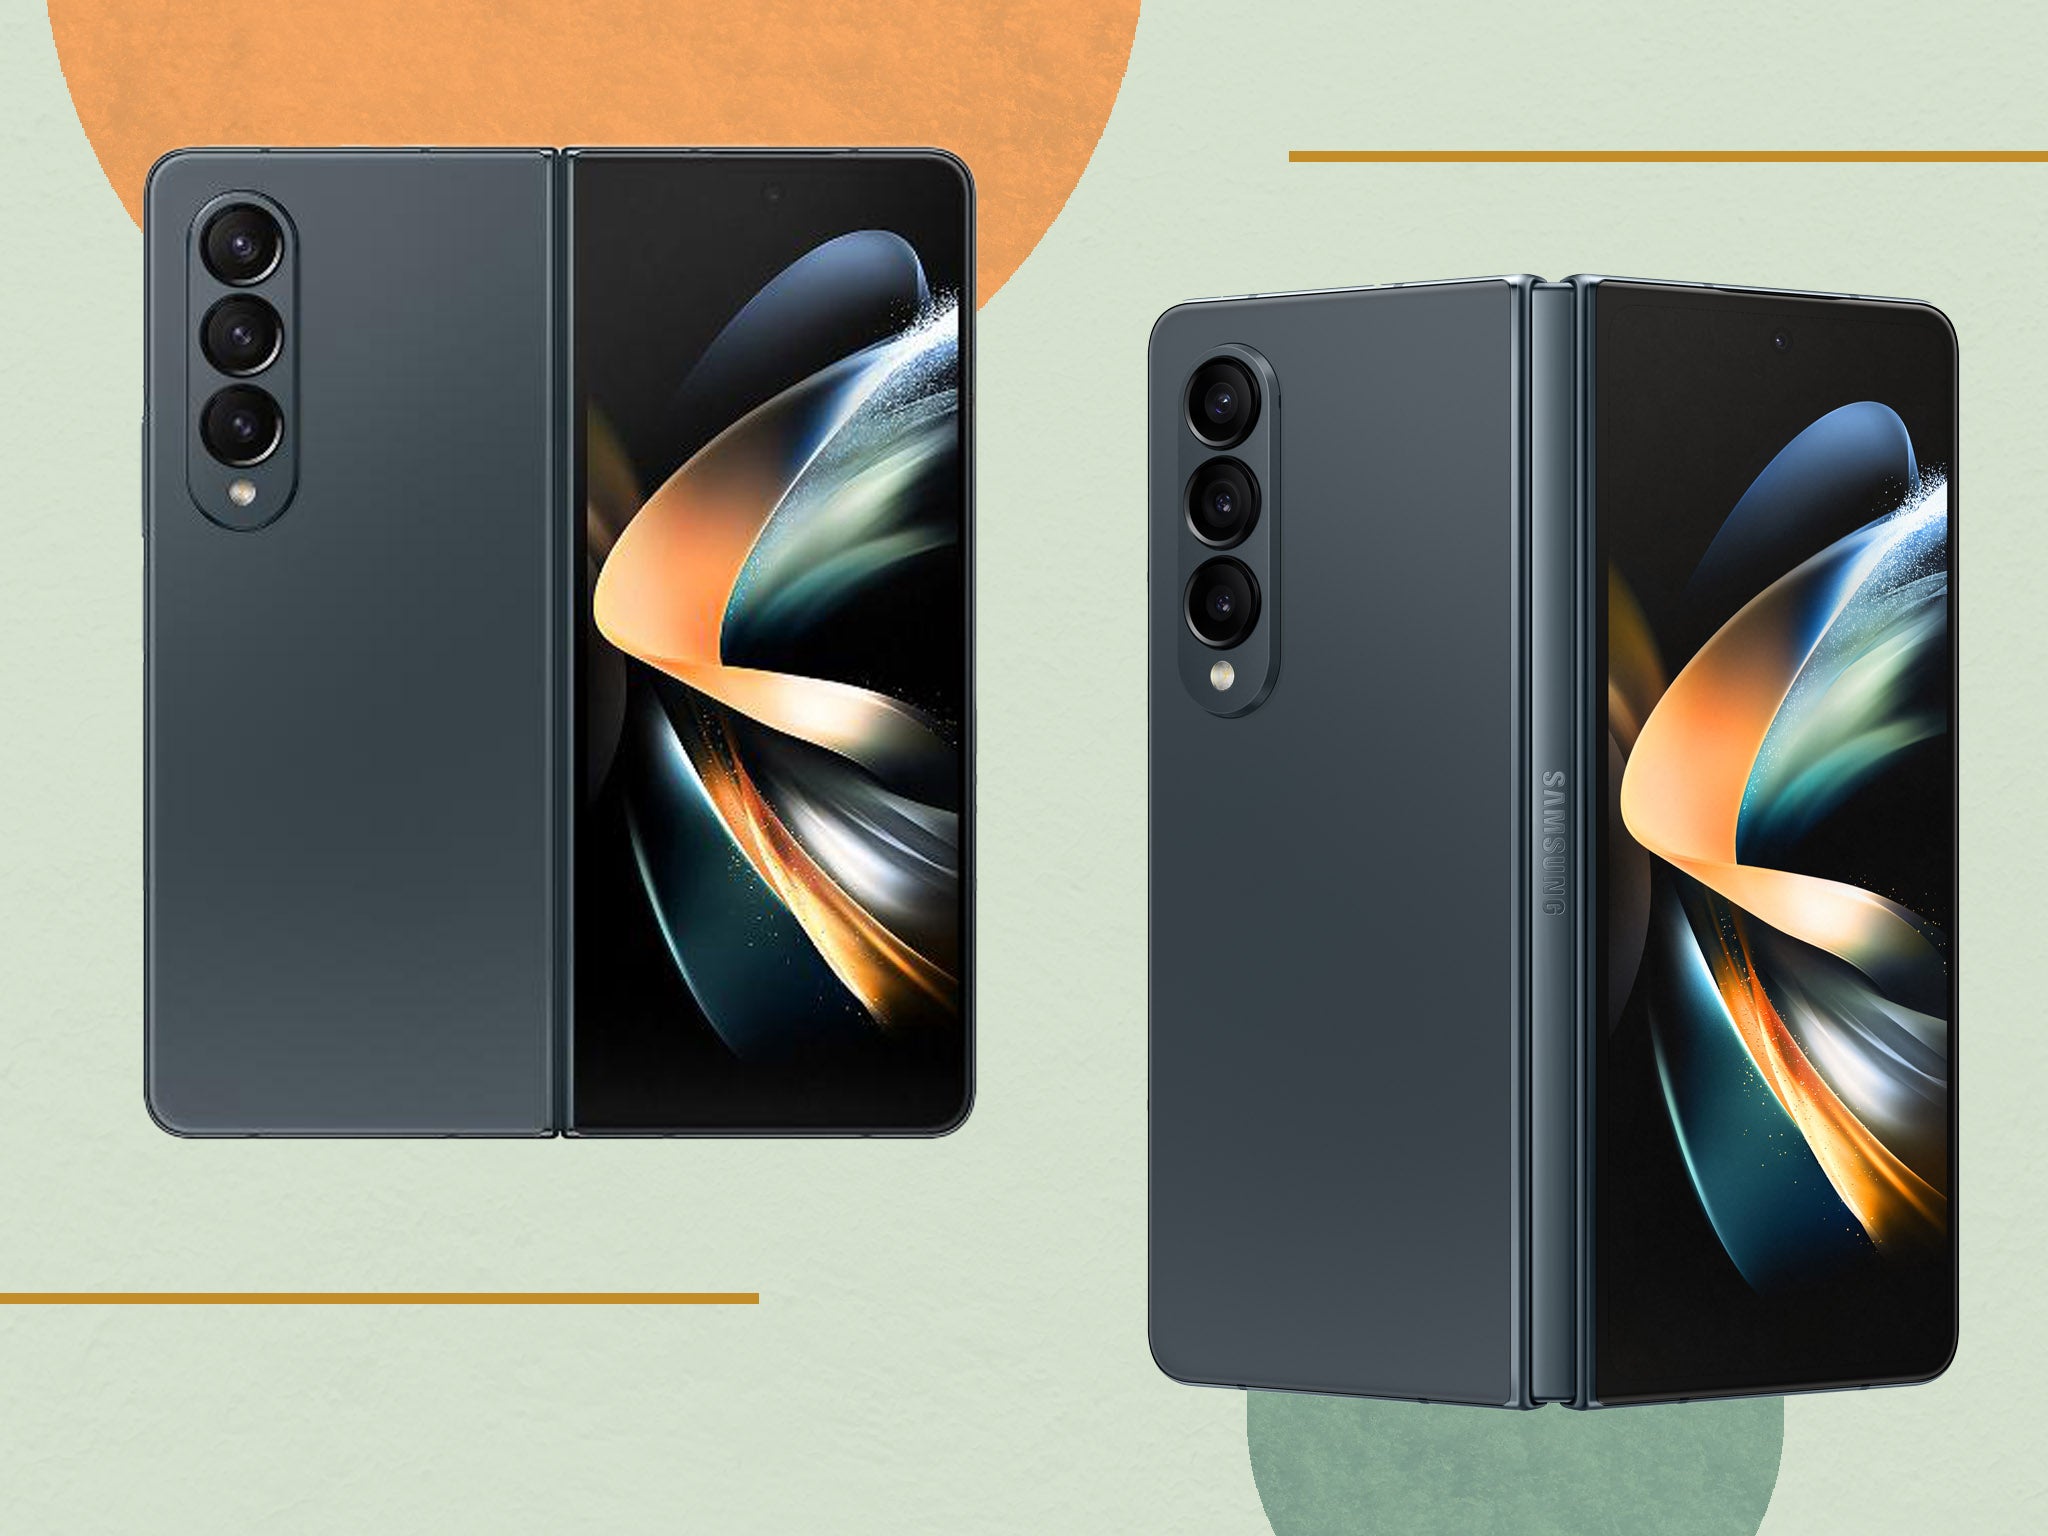 The folding phone is available in grey-green, phantom black and beige